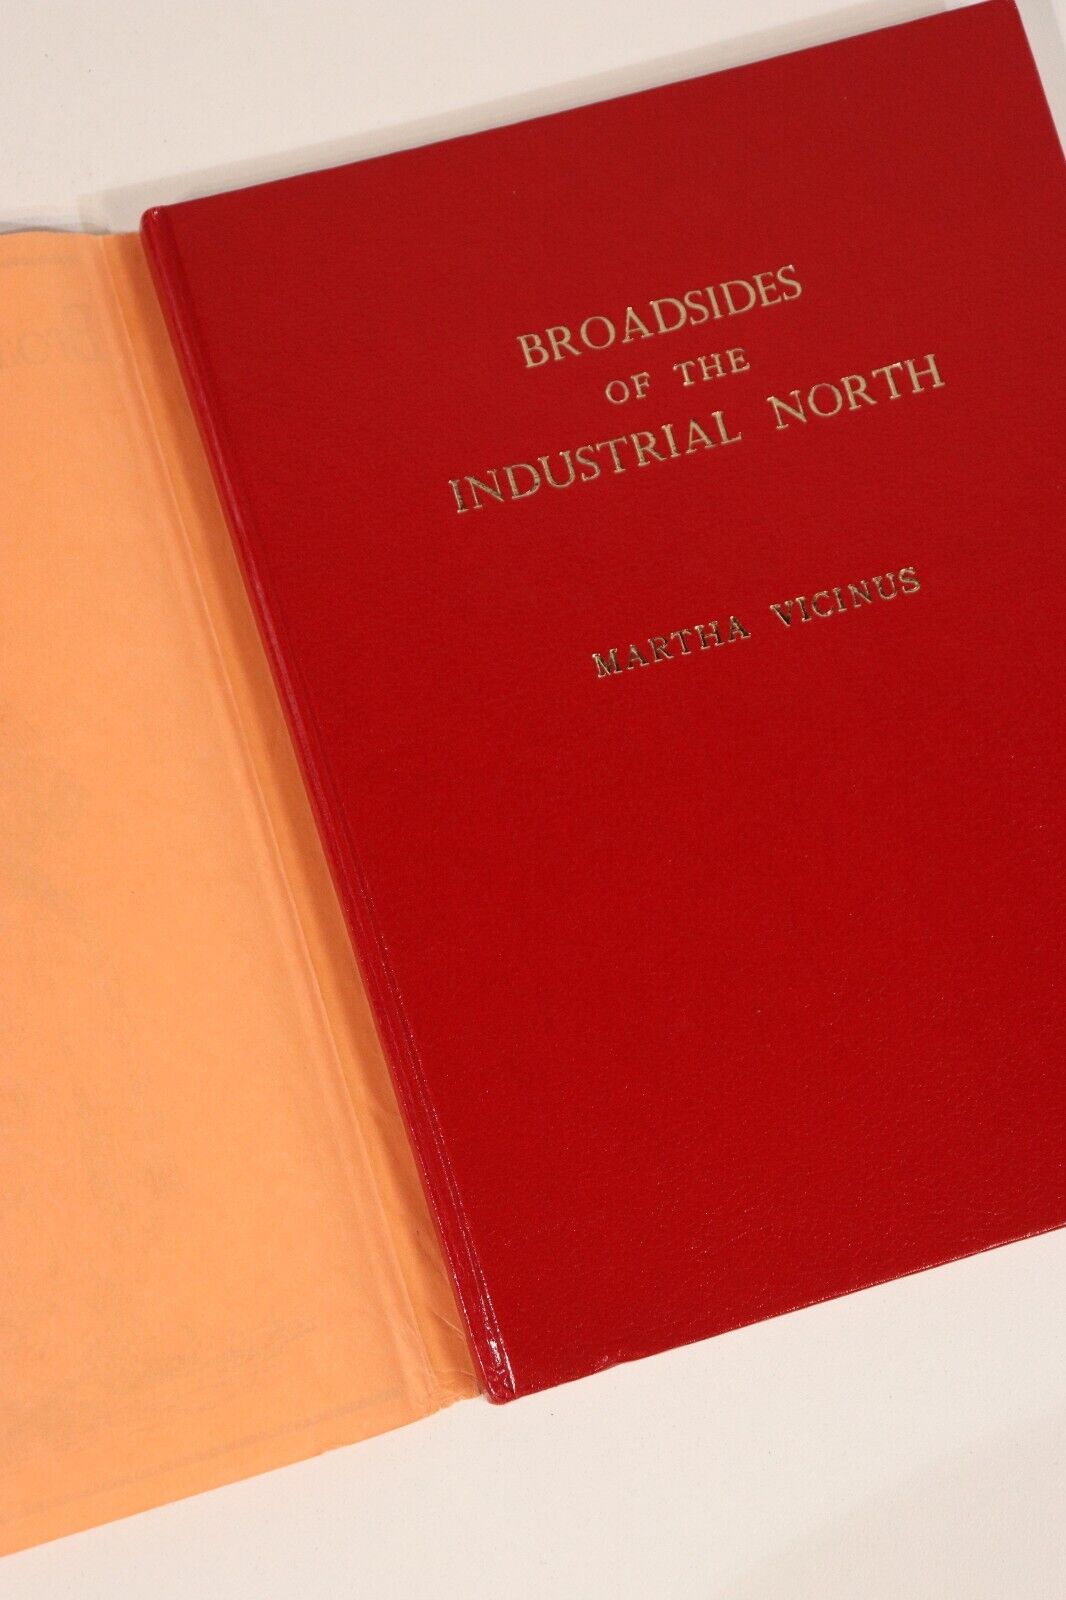 Broadsides Of The Industrial North by M. Vicinus - 1975 - British History Book